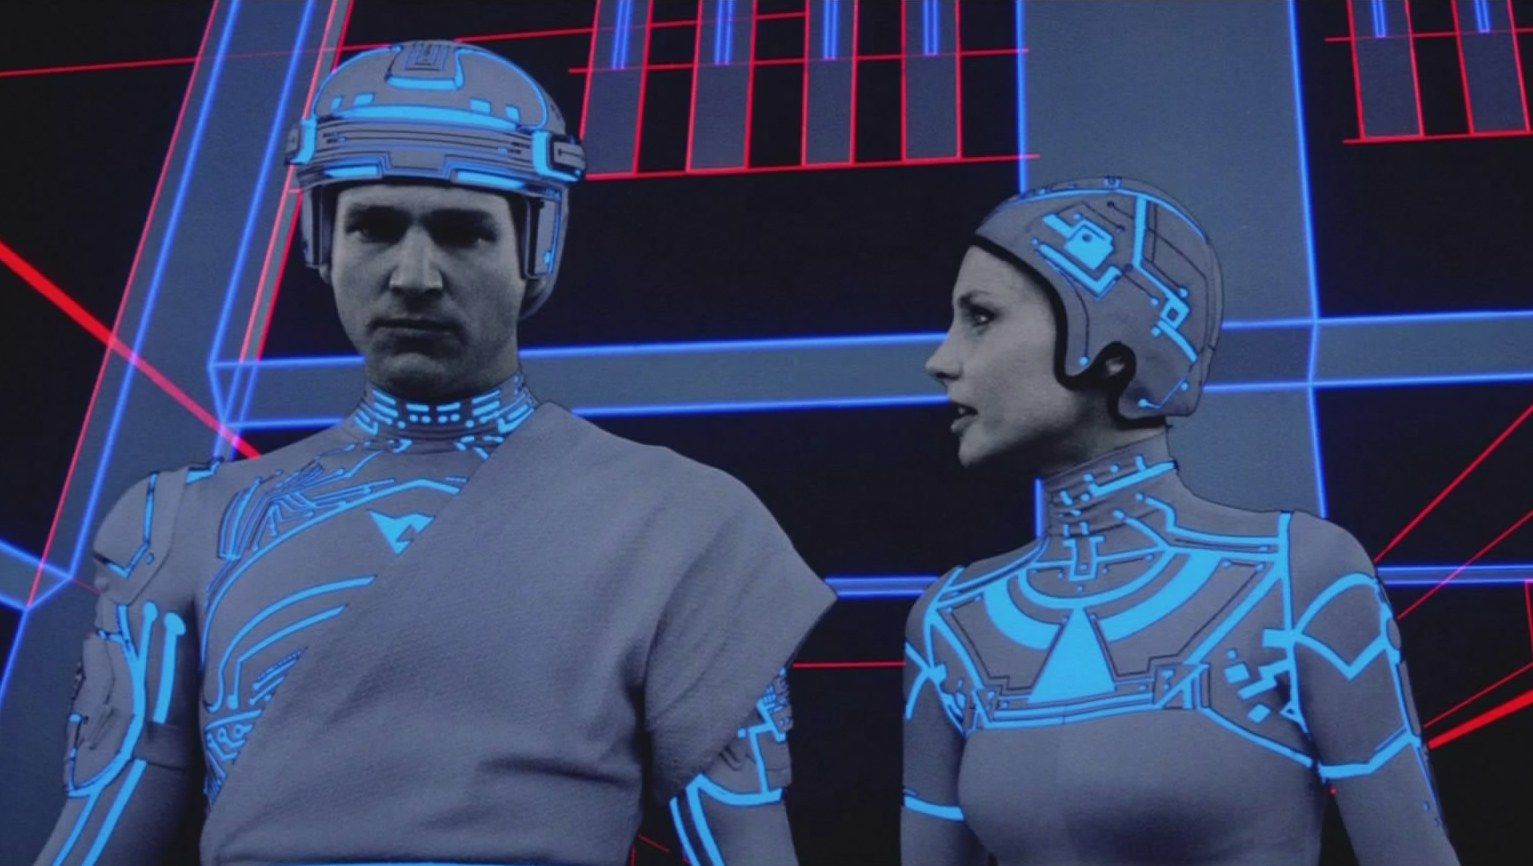 Tron was disqualified from receiving an Oscar nom for specia